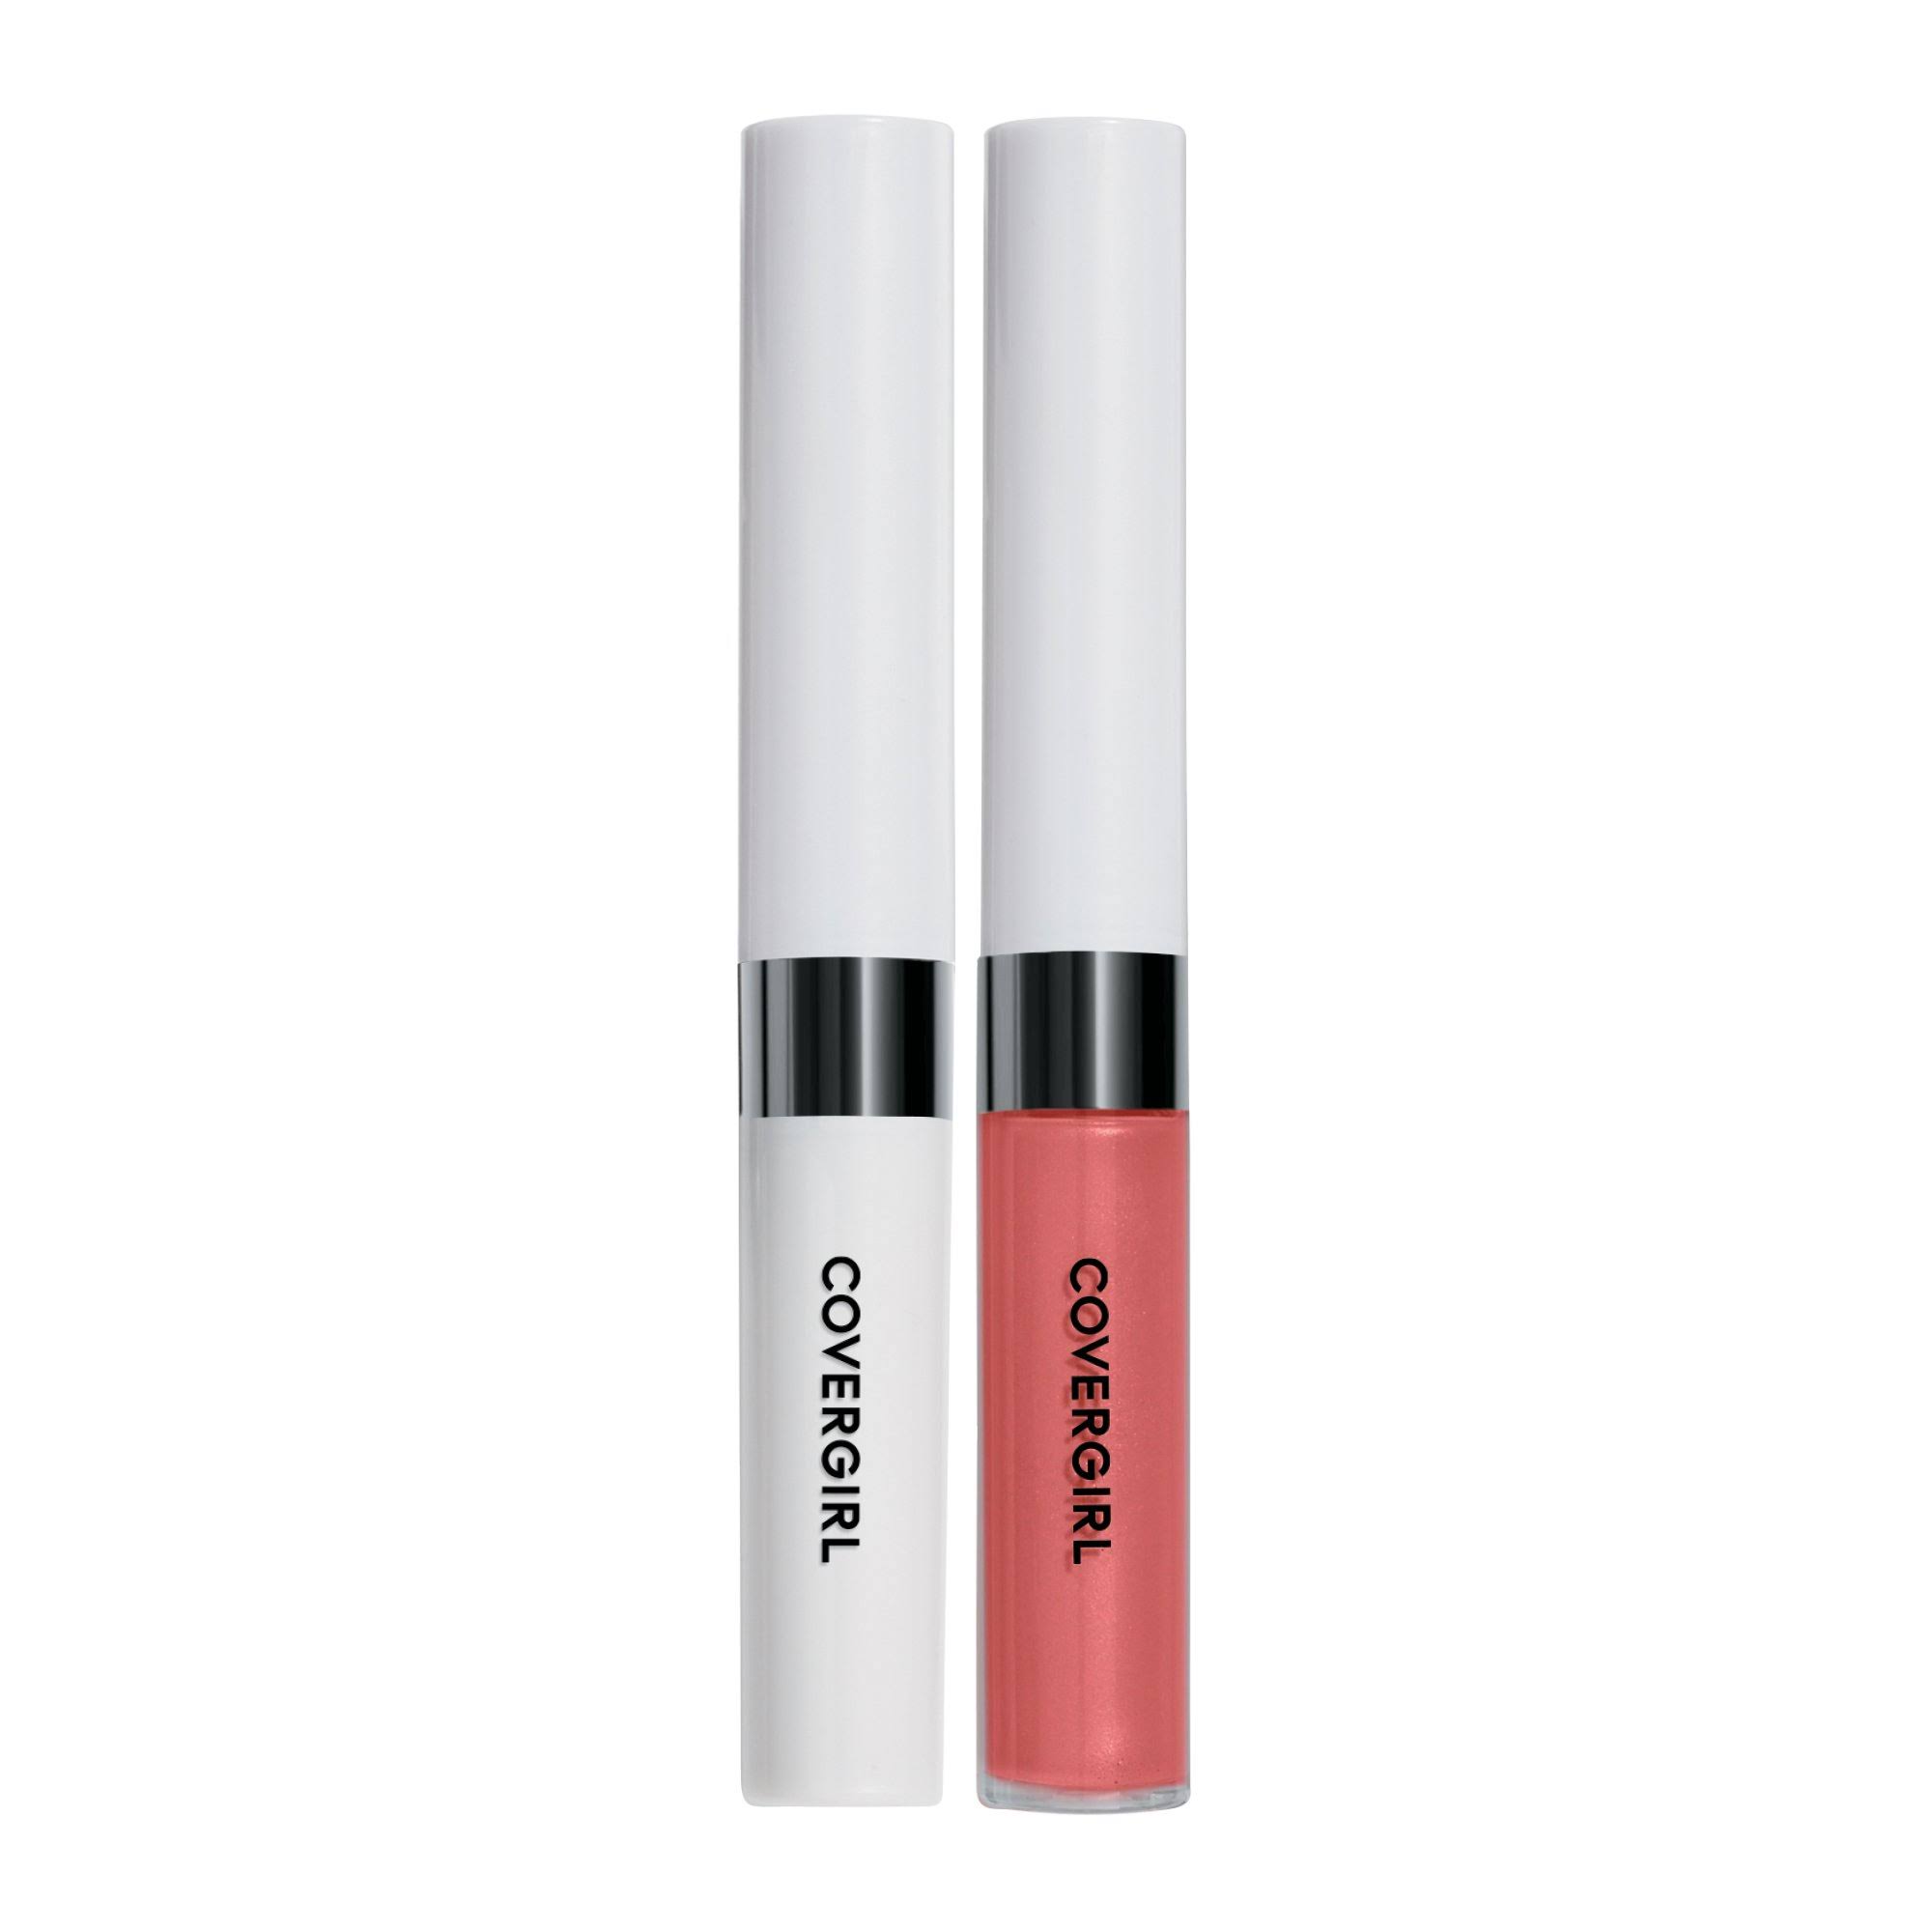 Covergirl Outlast All Day Moisturizing Lip Color - 512 Coral Sunset, 1.9g